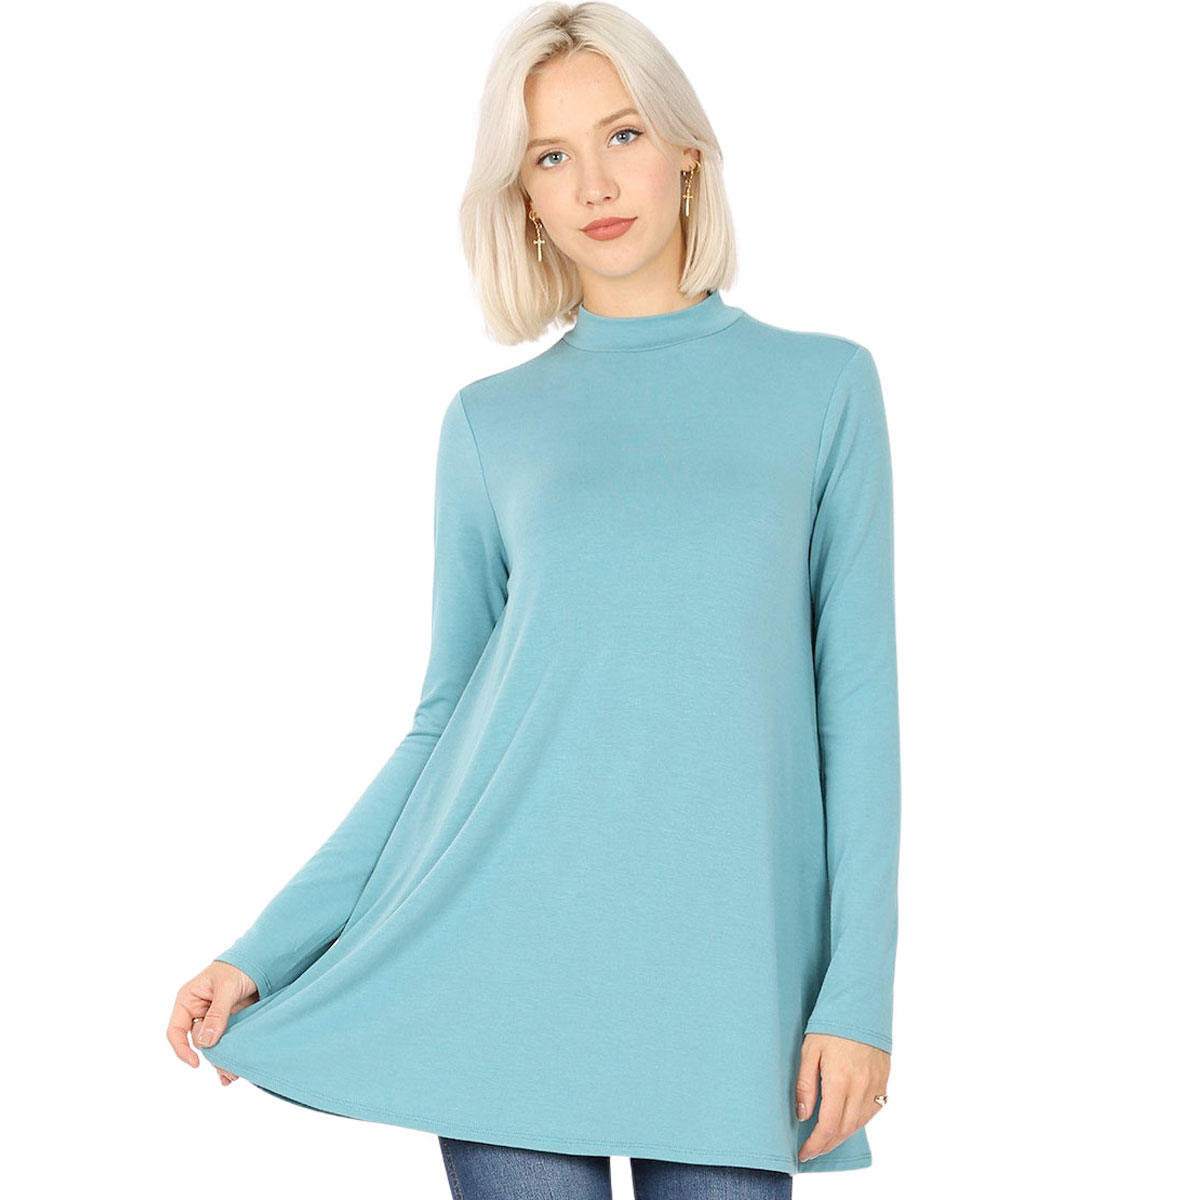 DUSTY TEAL Mock Turtleneck - Long Sleeve with Pockets 1641 	